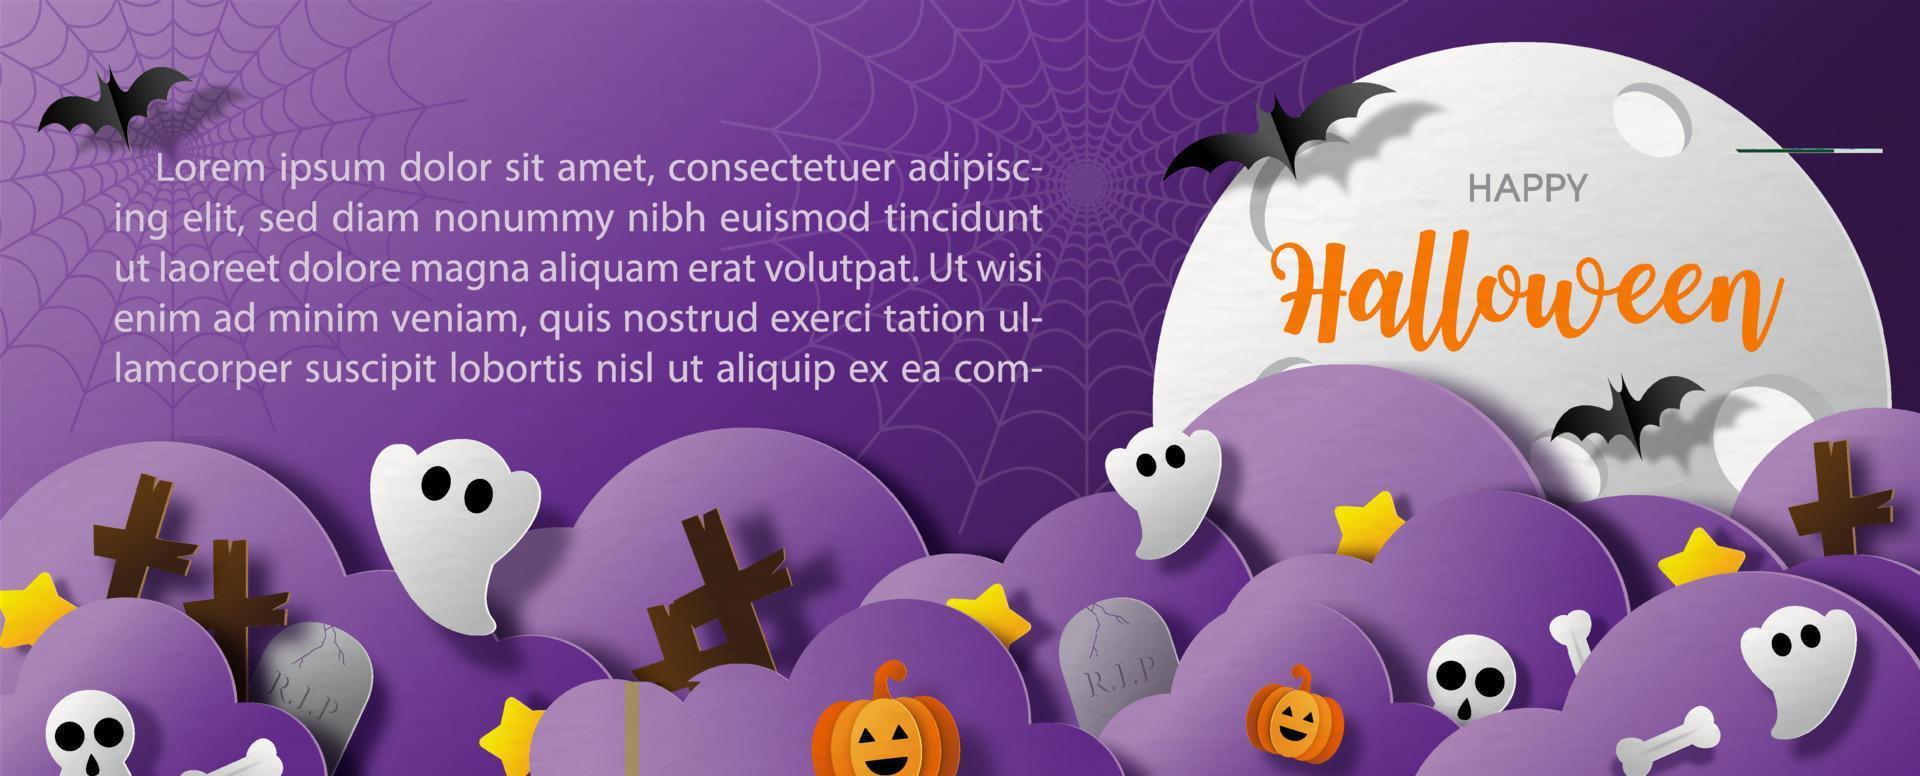 Halloween cute ghosts party in a graveyard scene with violet clouds and giant moon, example texts in paper cut style and web banner design on violet and paper pattern background. vector